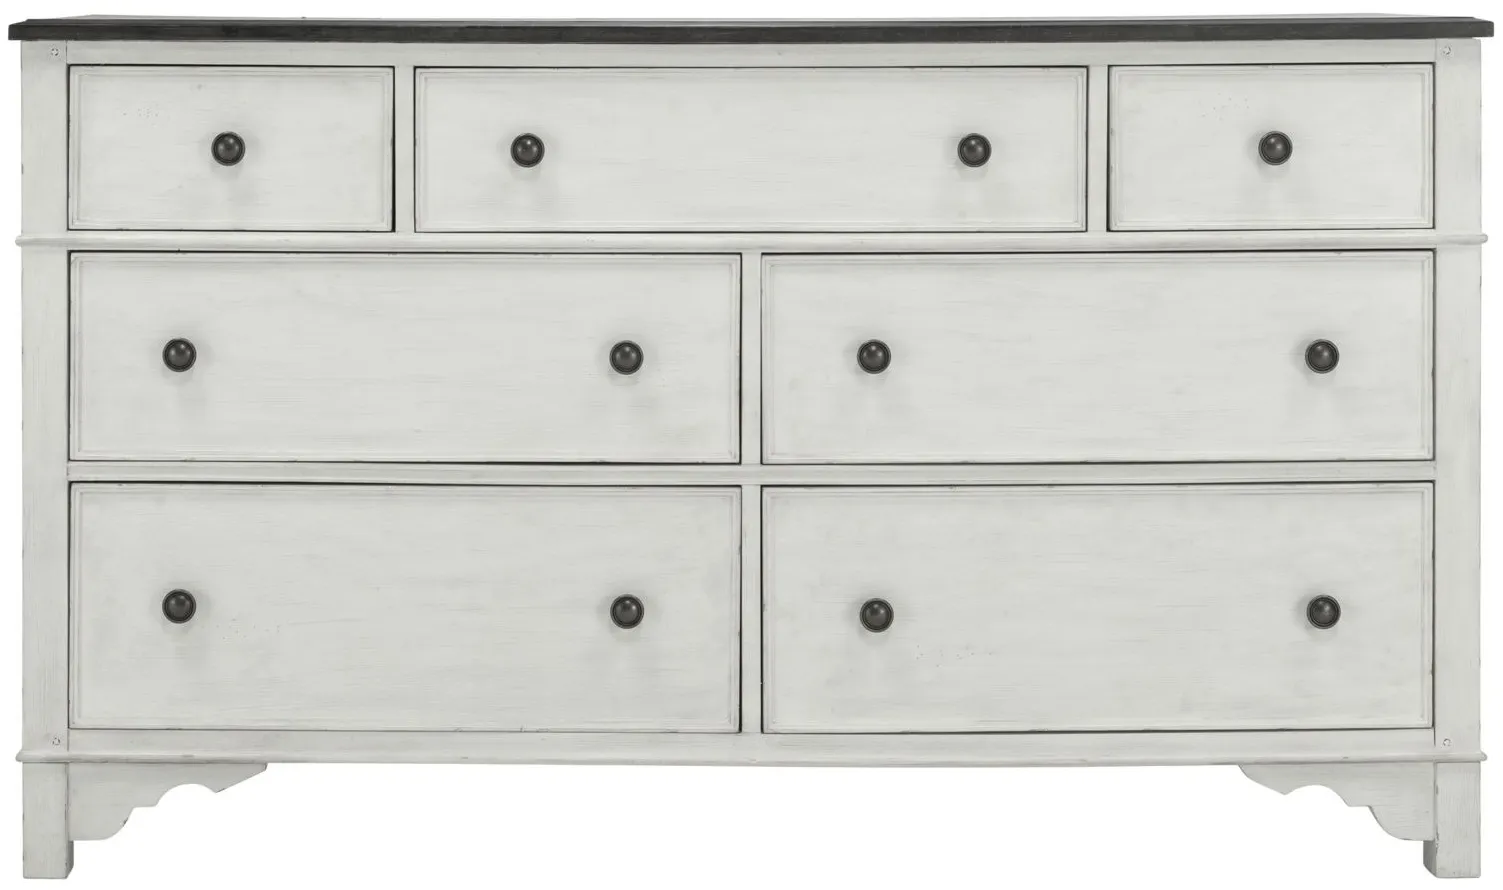 Colette Bedroom Dresser in Feathered White / Rich Charcoal by Riverside Furniture